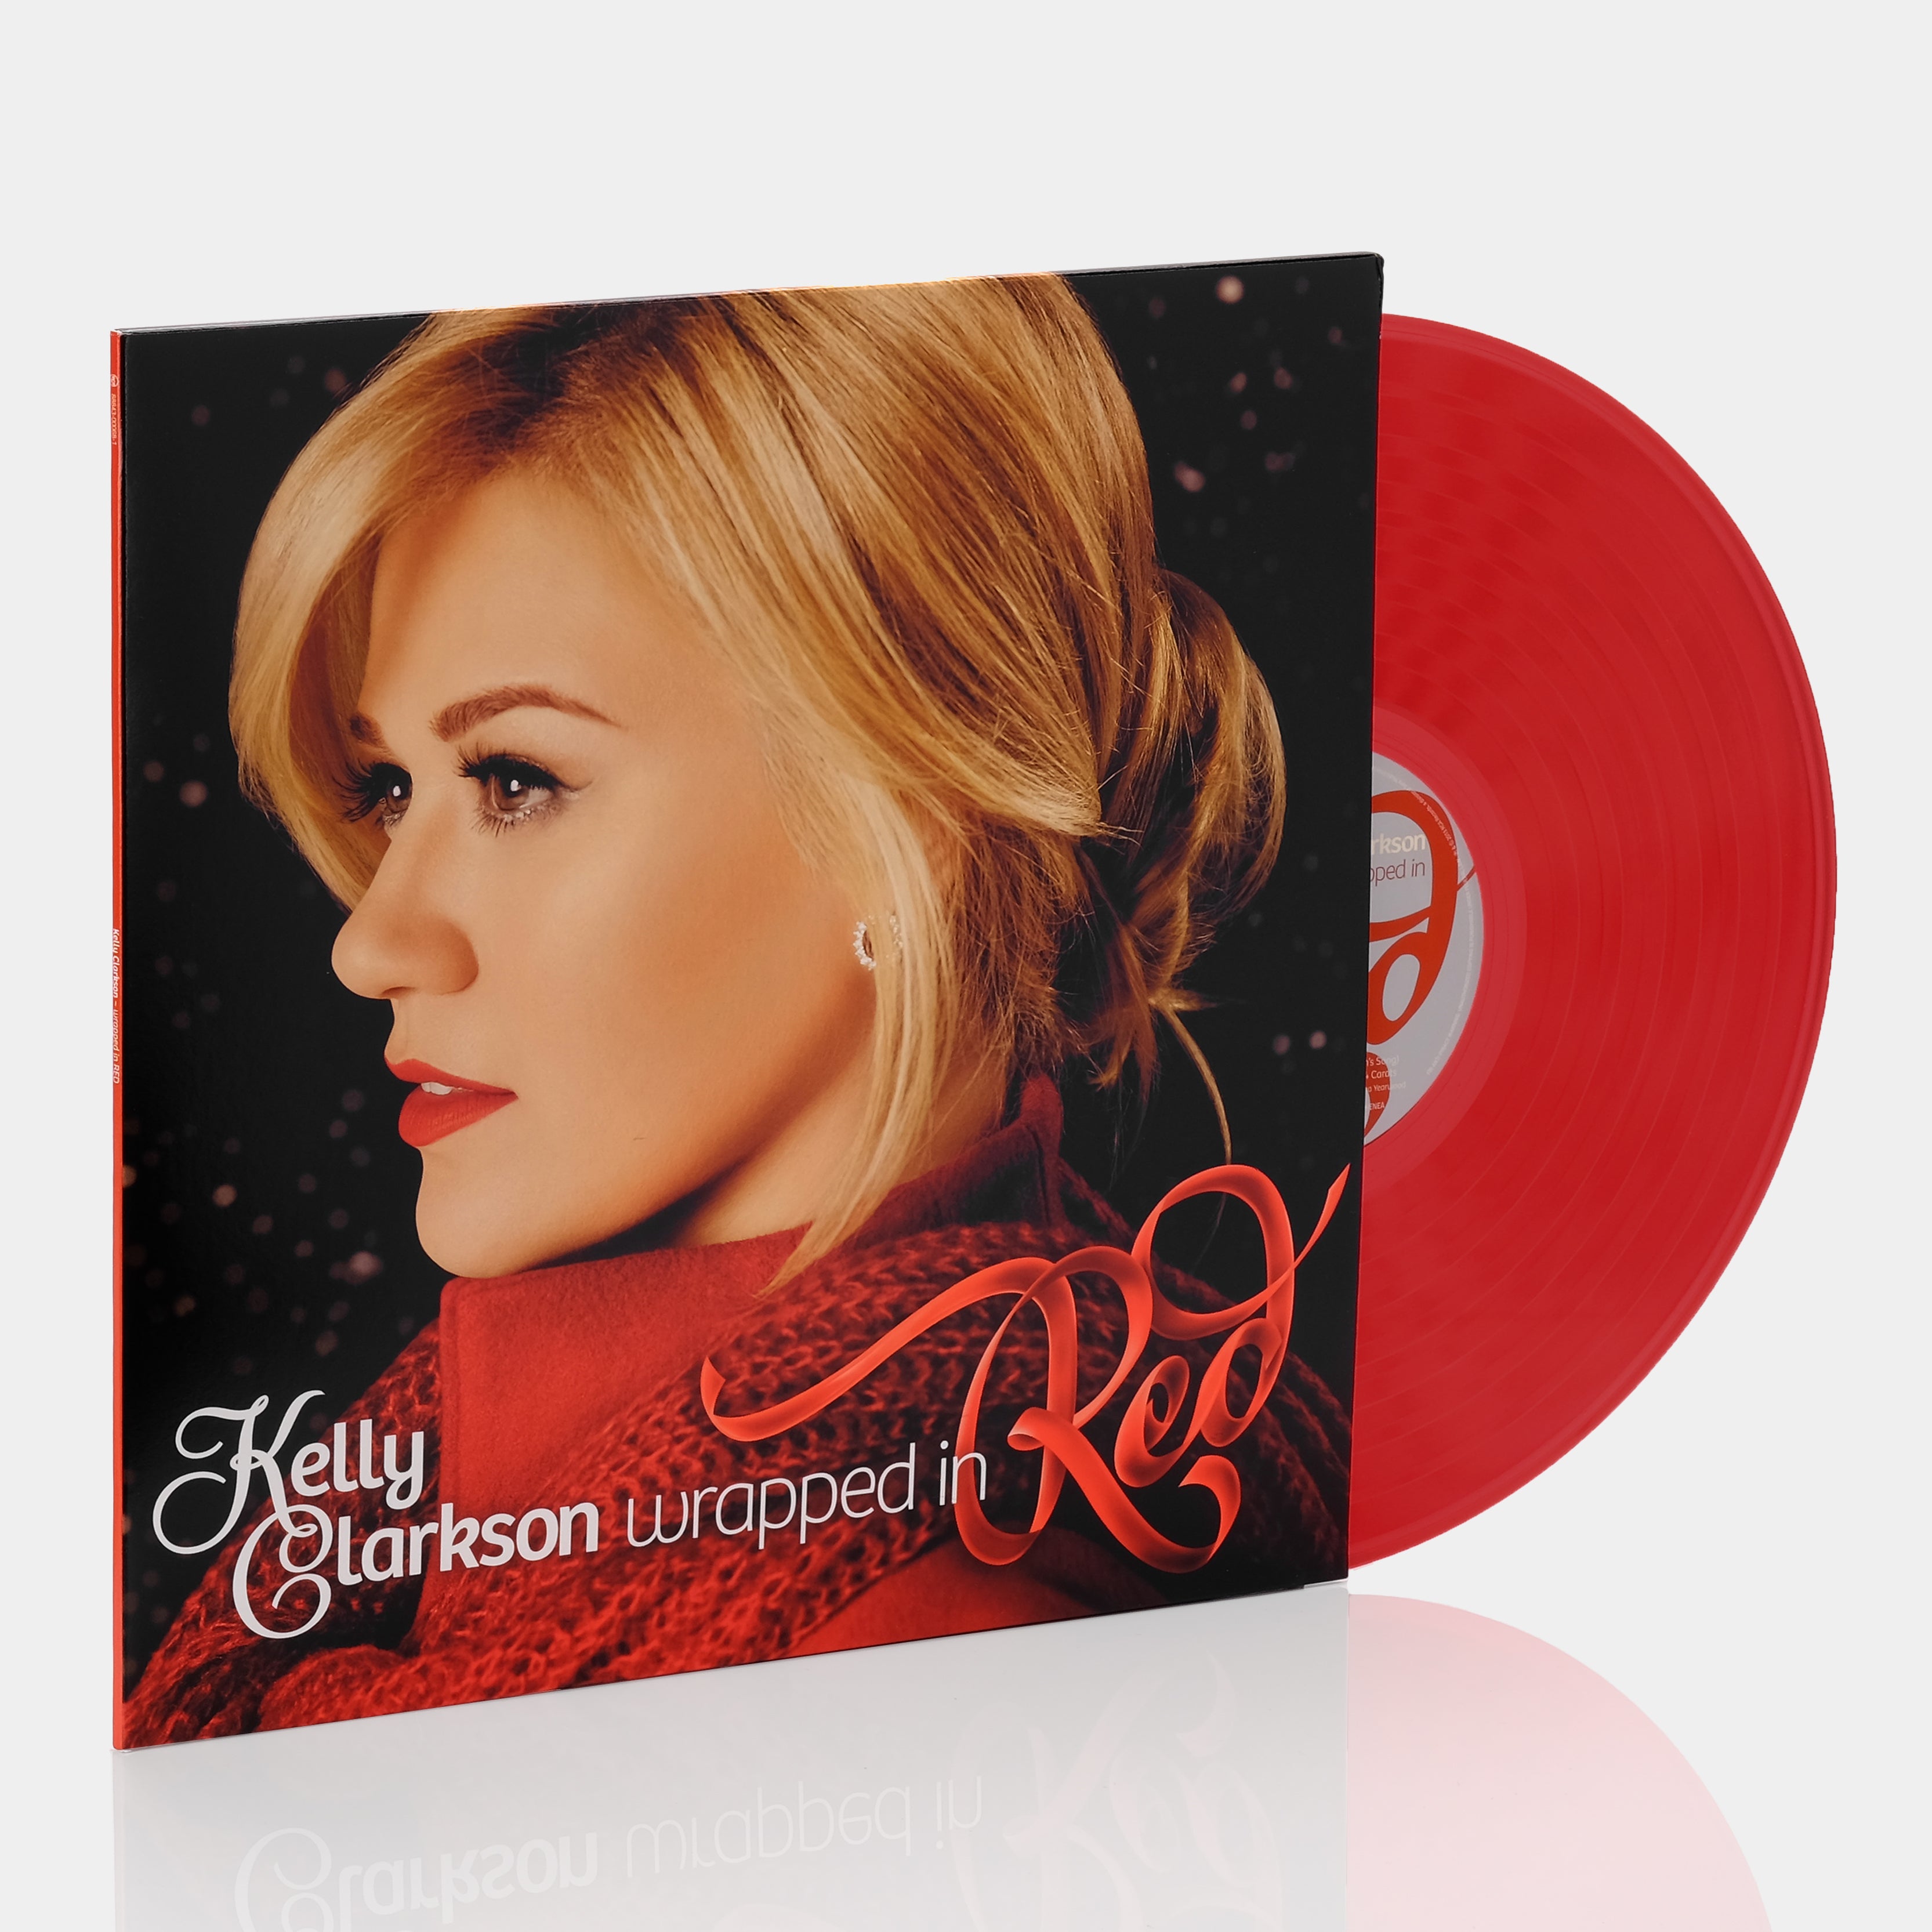 Kelly Clarkson - Wrapped In Red LP Red Vinyl Record